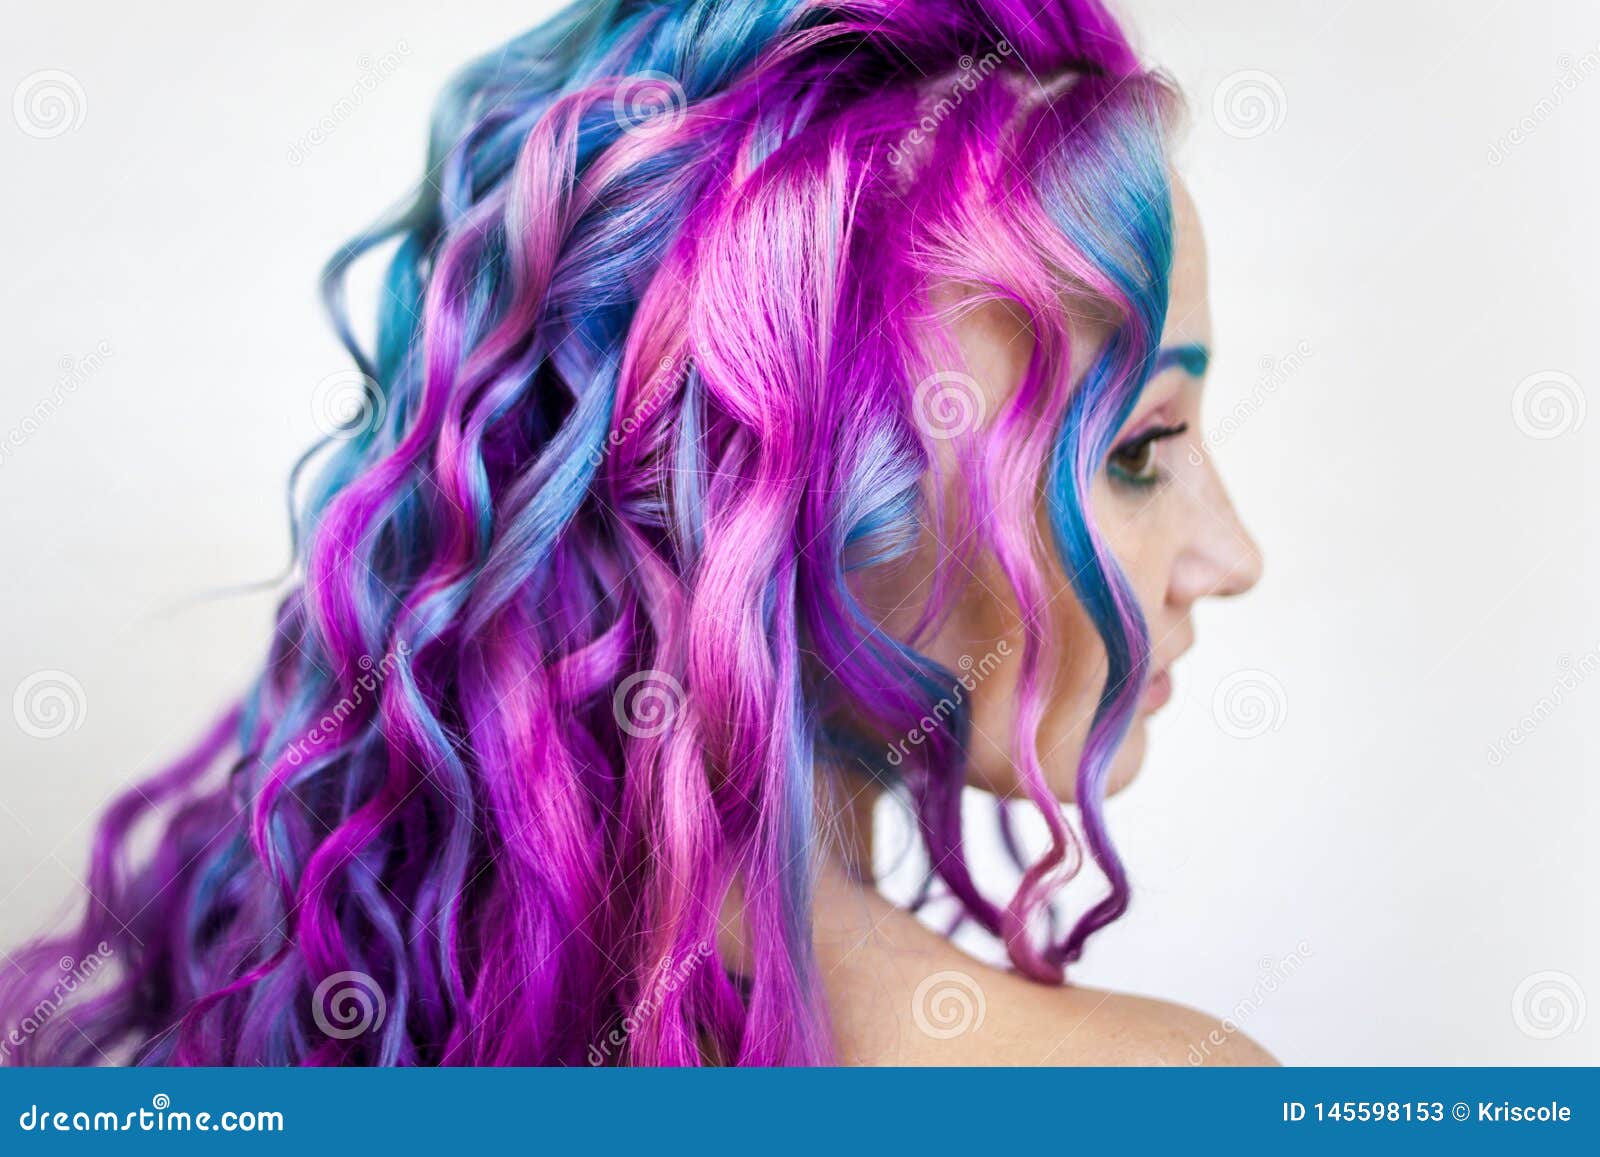 1. "Purple, Pink, and Blue Hair: 25 Ideas for Your Next Colorful Look" - wide 2